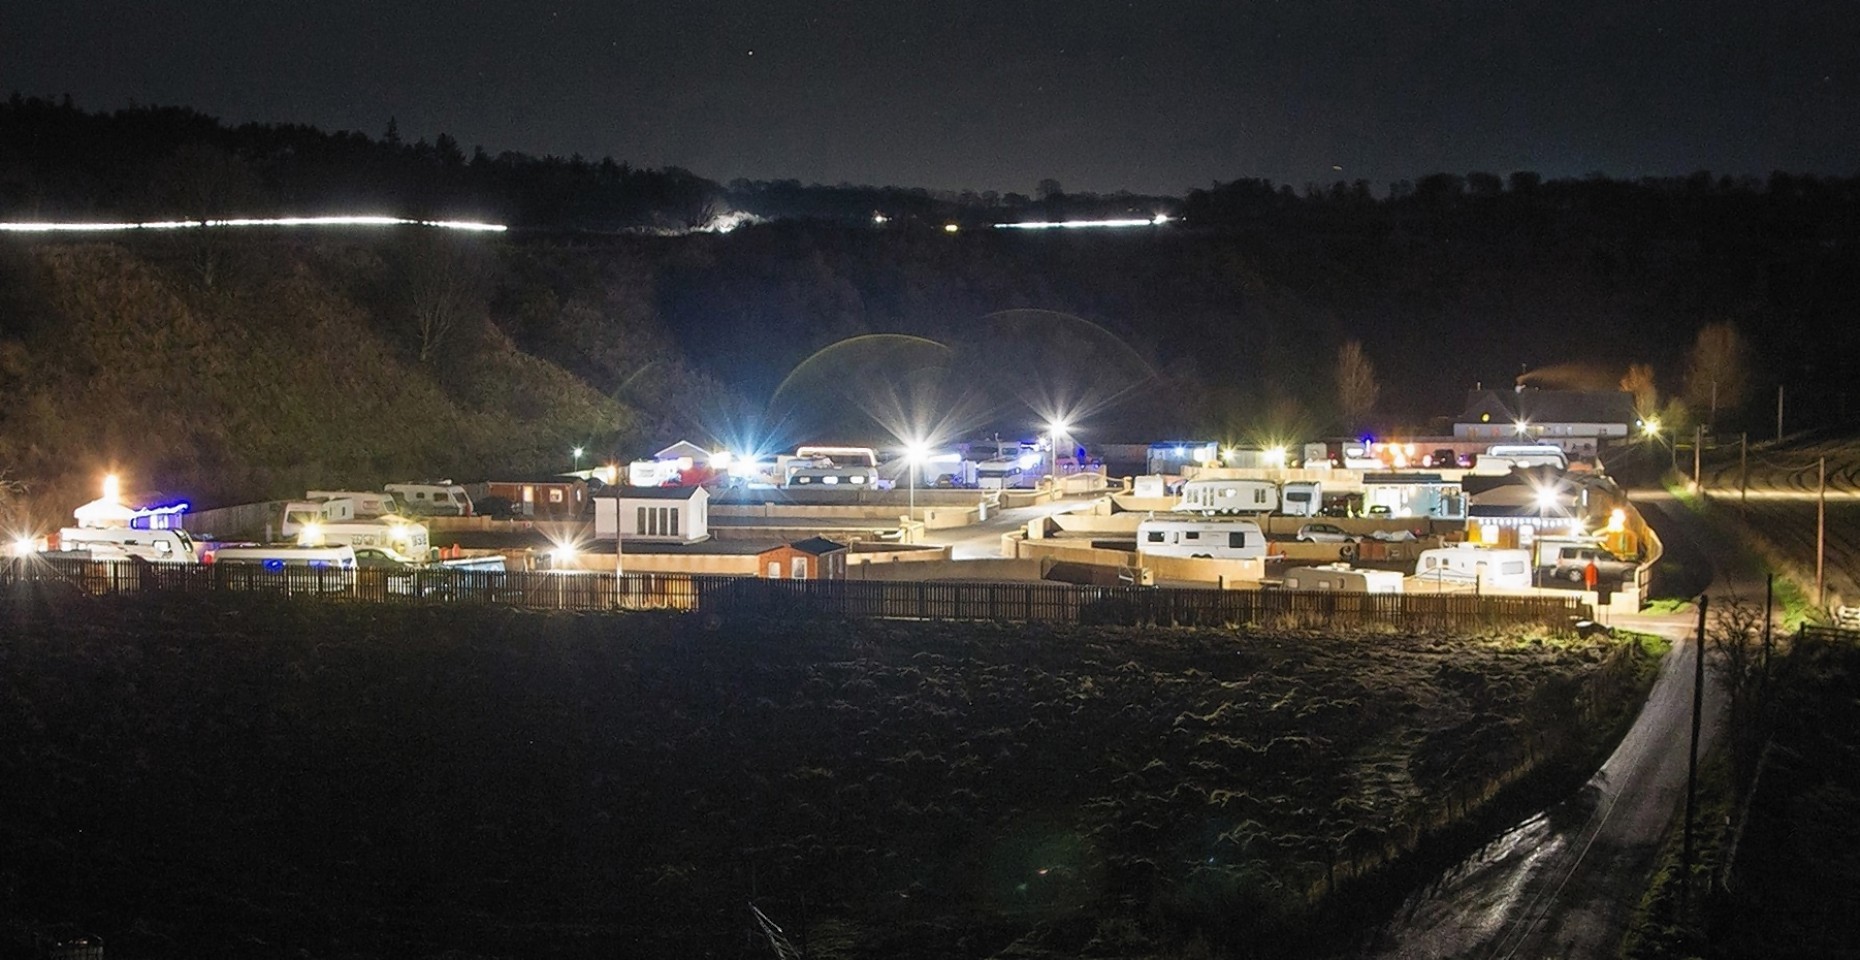 The St Cyrus travellers site at night